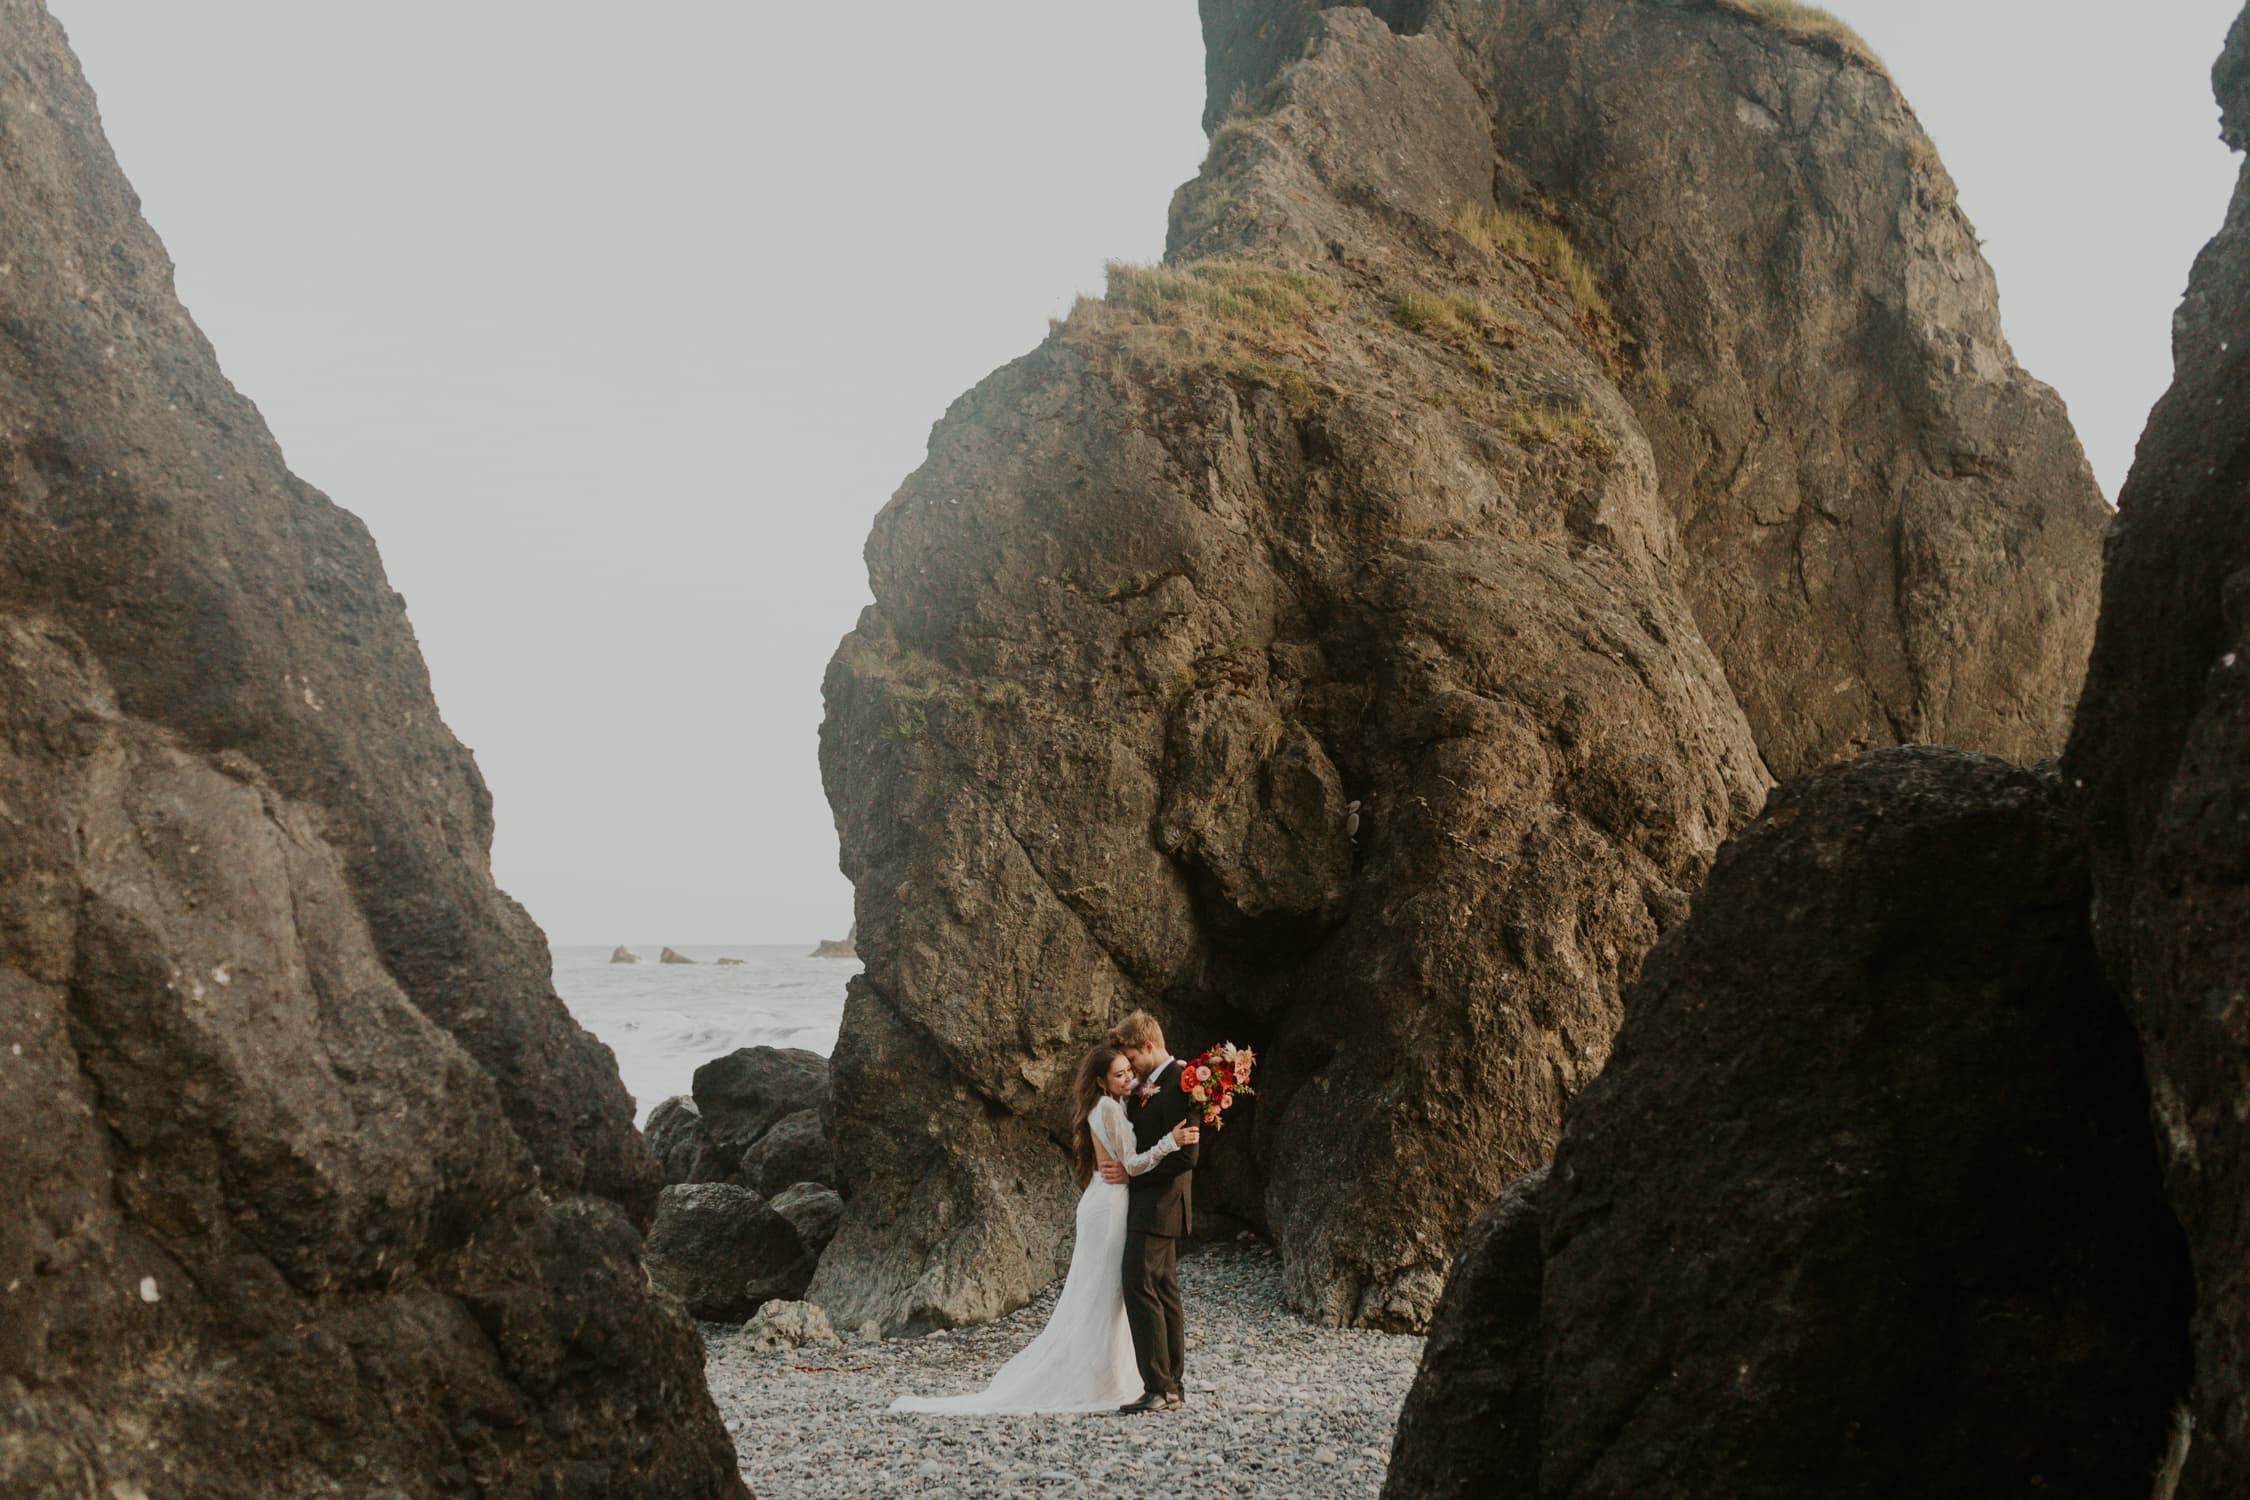 A bride and groom hugging each other on Ruby Beach in Olympic National Park.